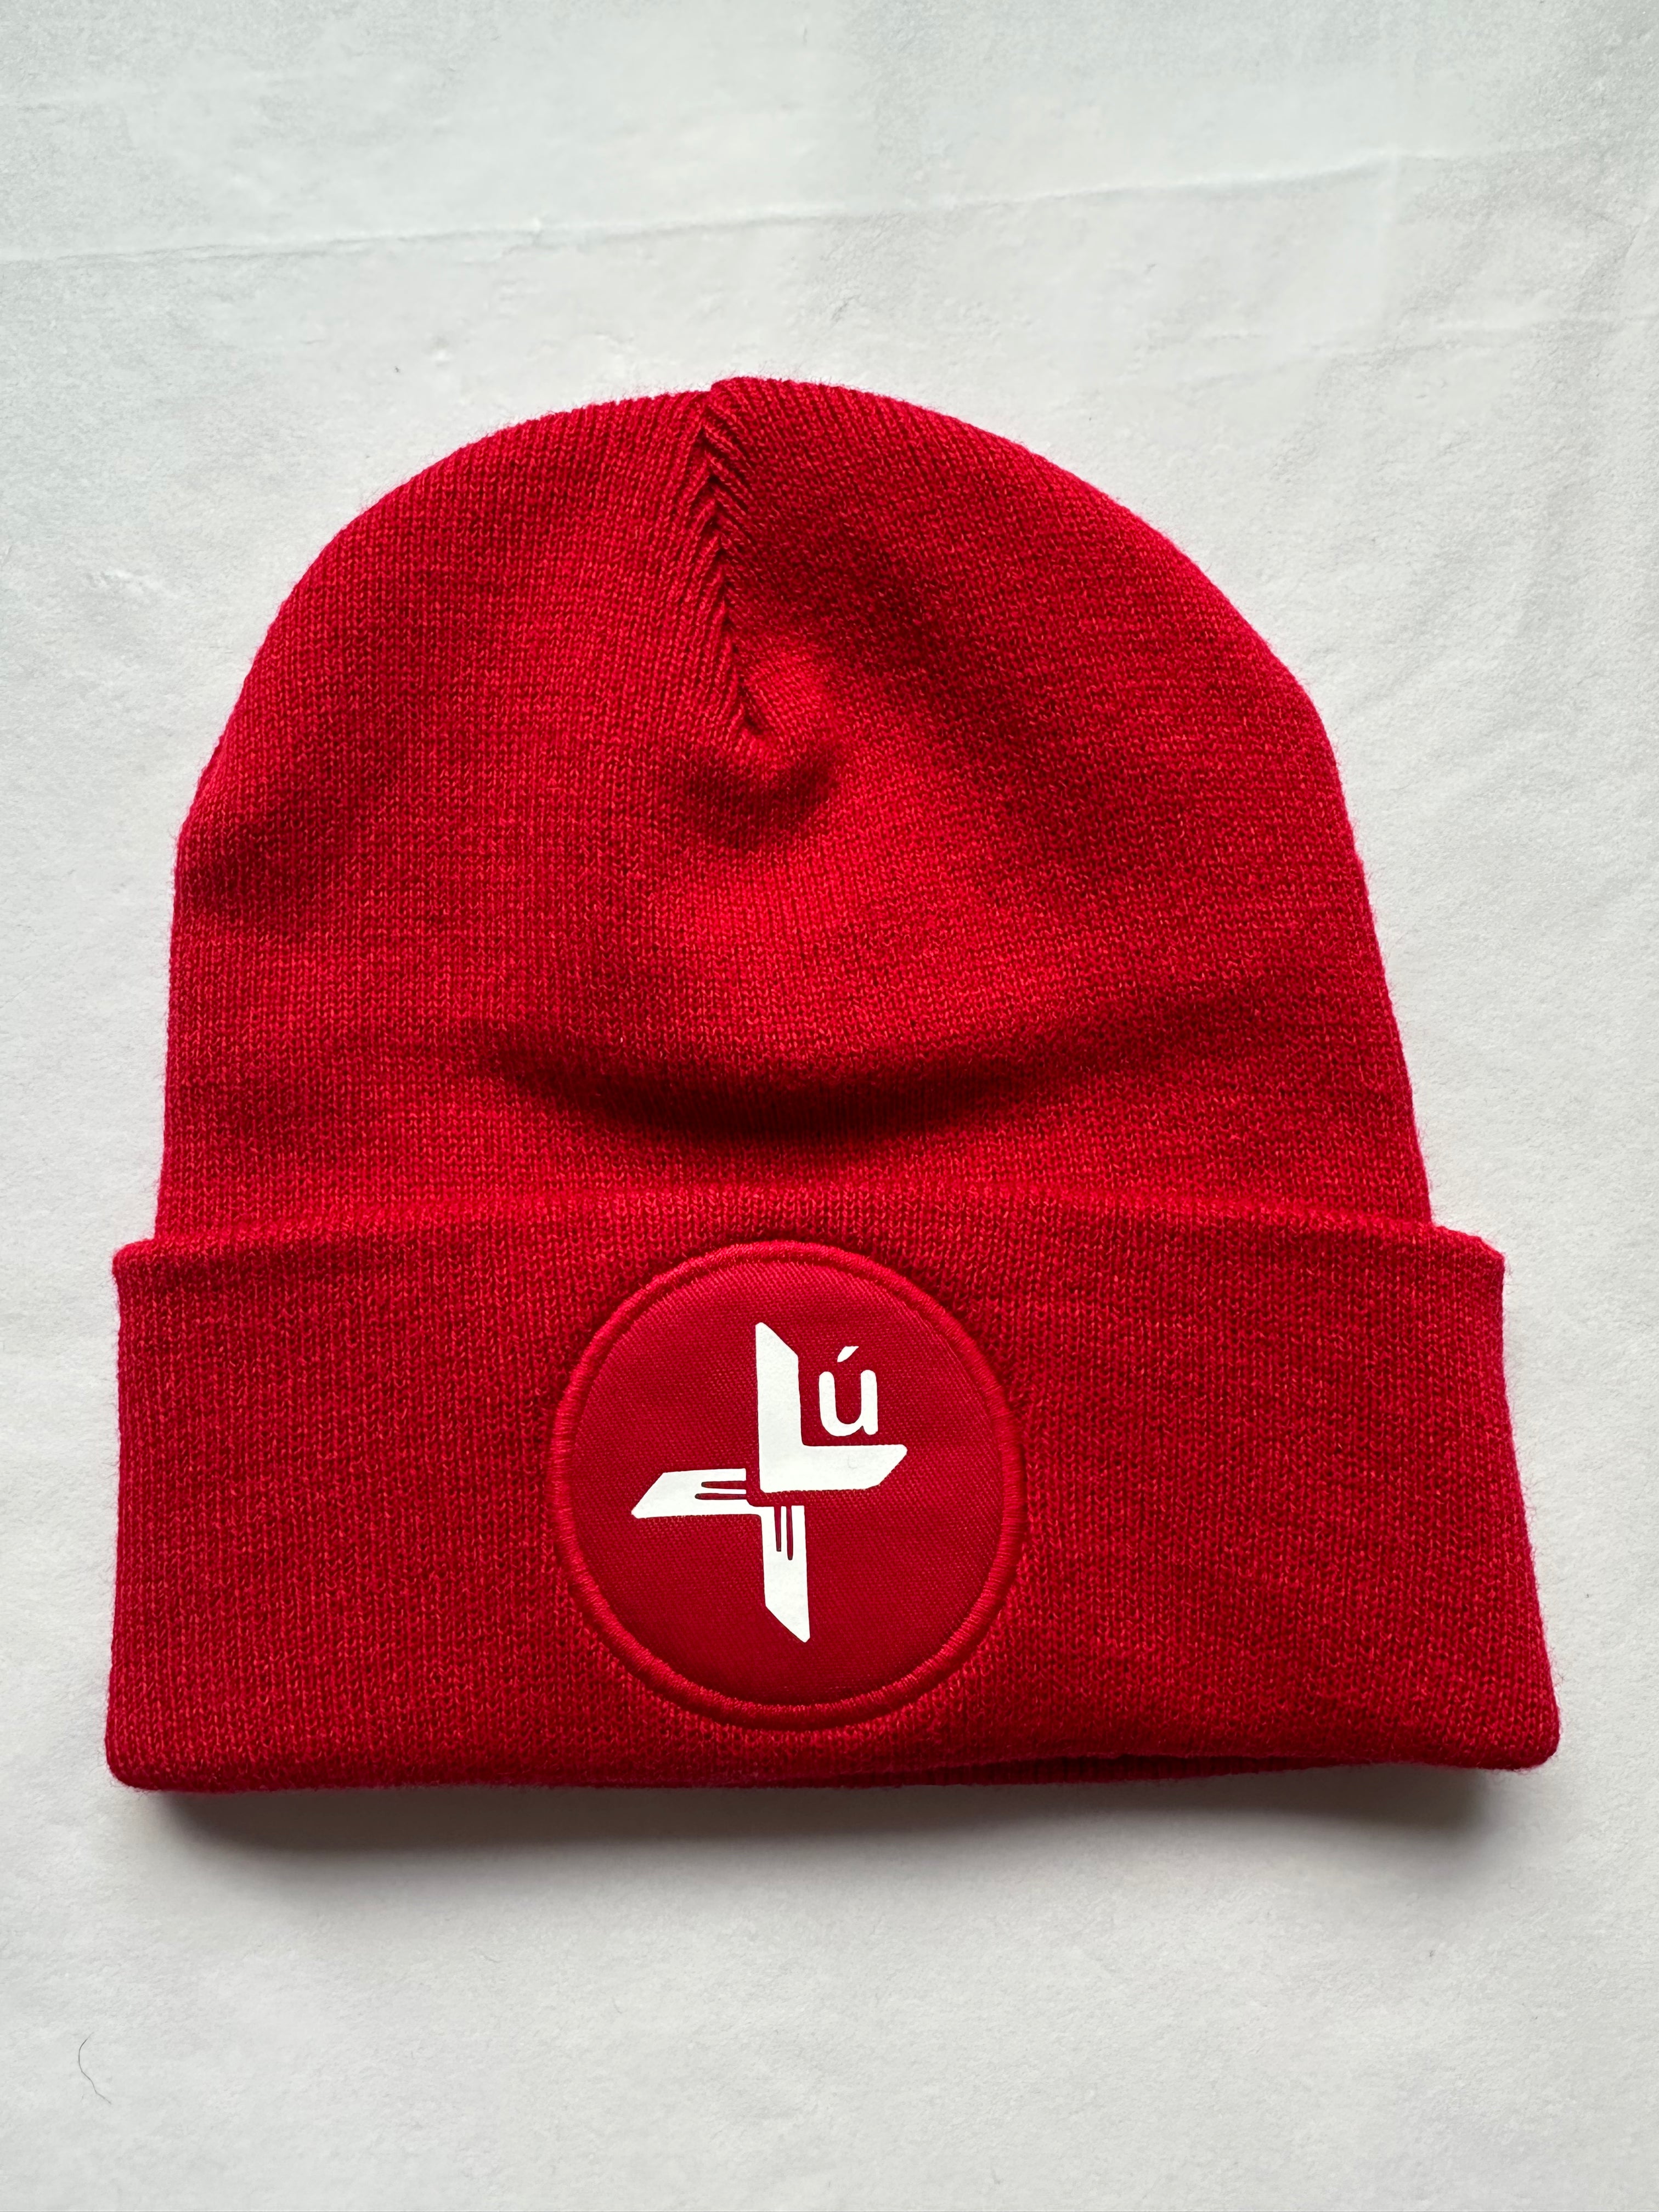 Lú Louth Supporters Beanie Hat | Phoenix